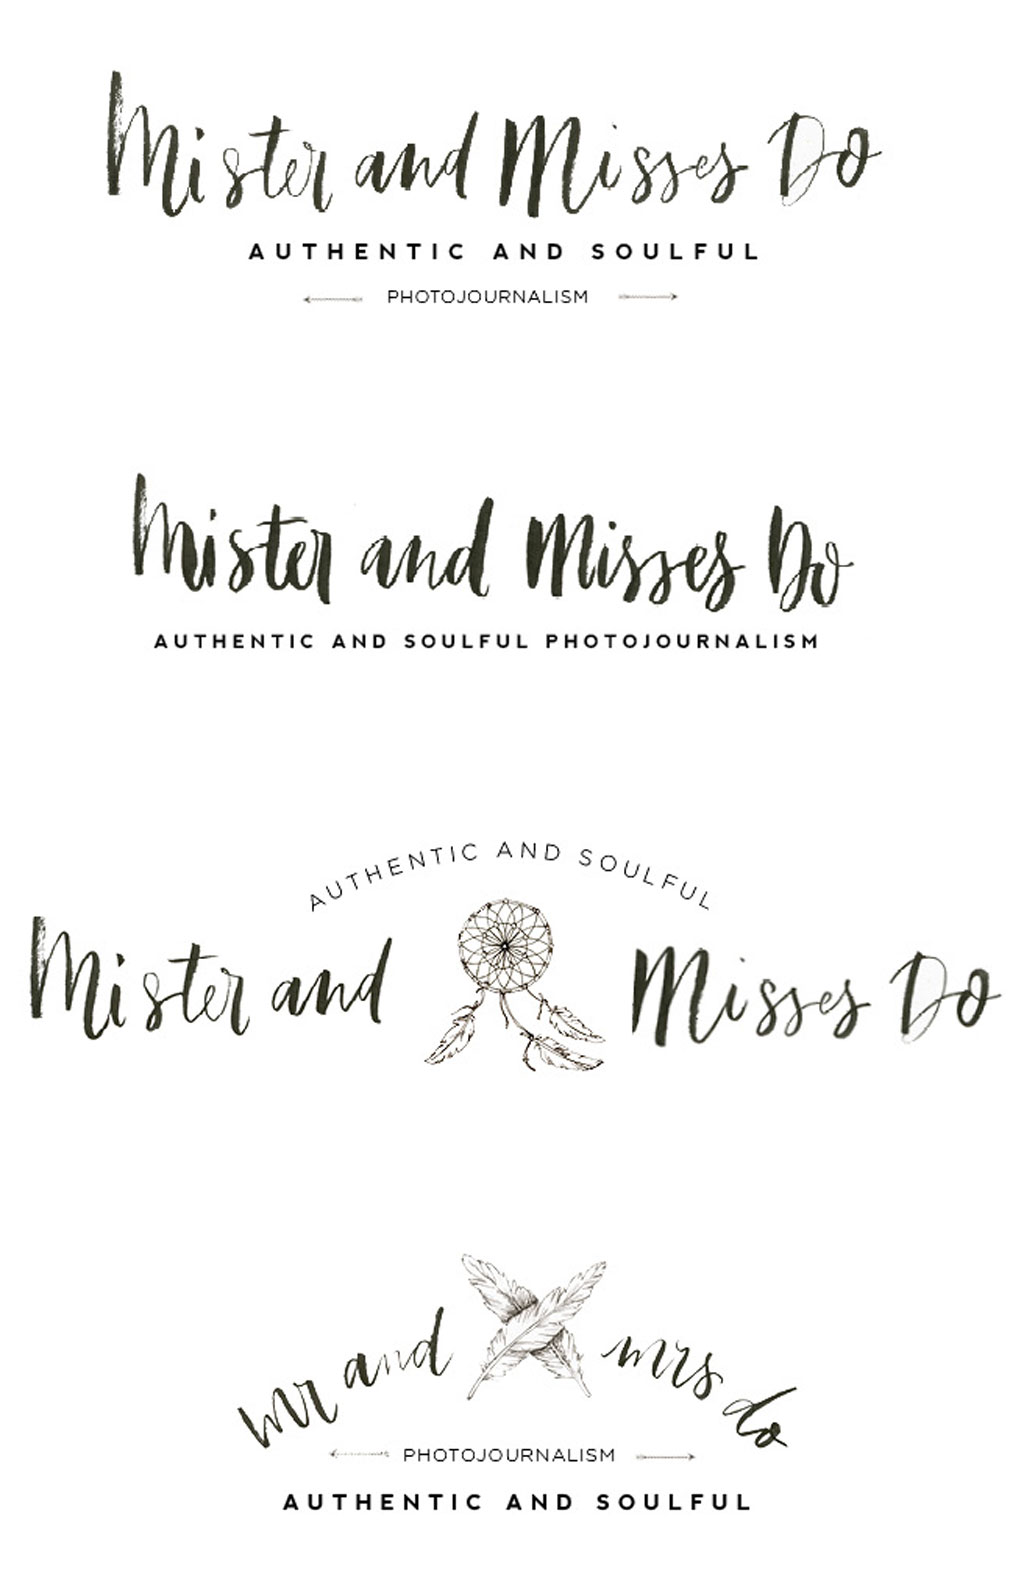 Mister and Misses Do | Logo design and branding | by Nicnillas ink